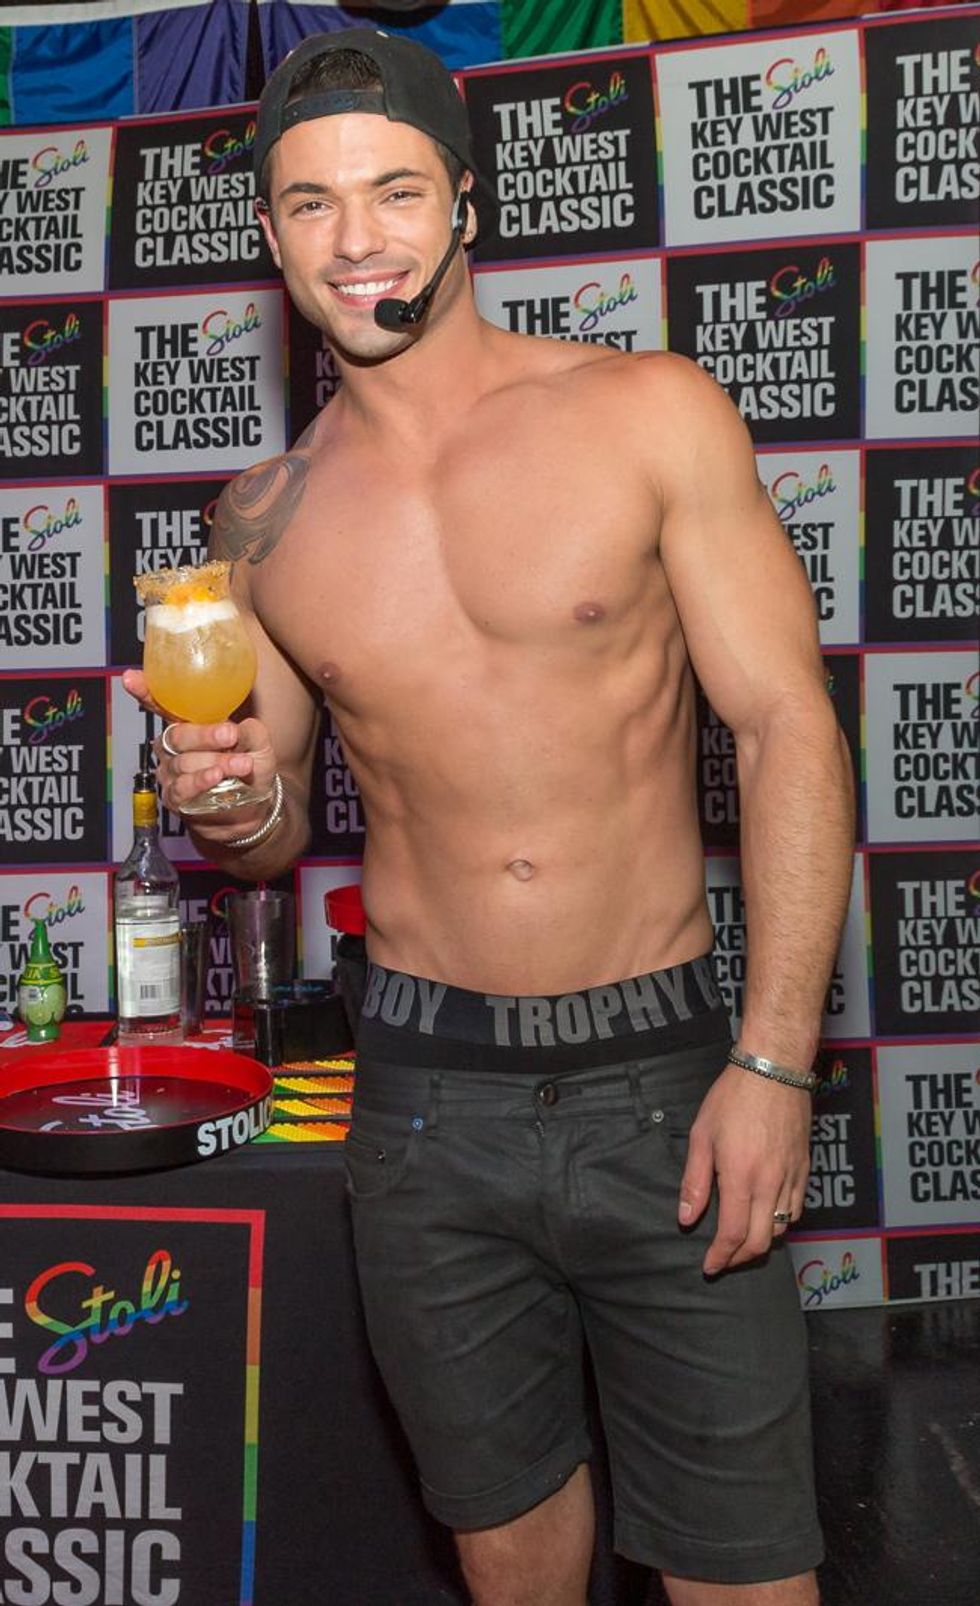 Bar Star Cory Z., representing Los Angeles and The Abbey, competes at 801 Bar.